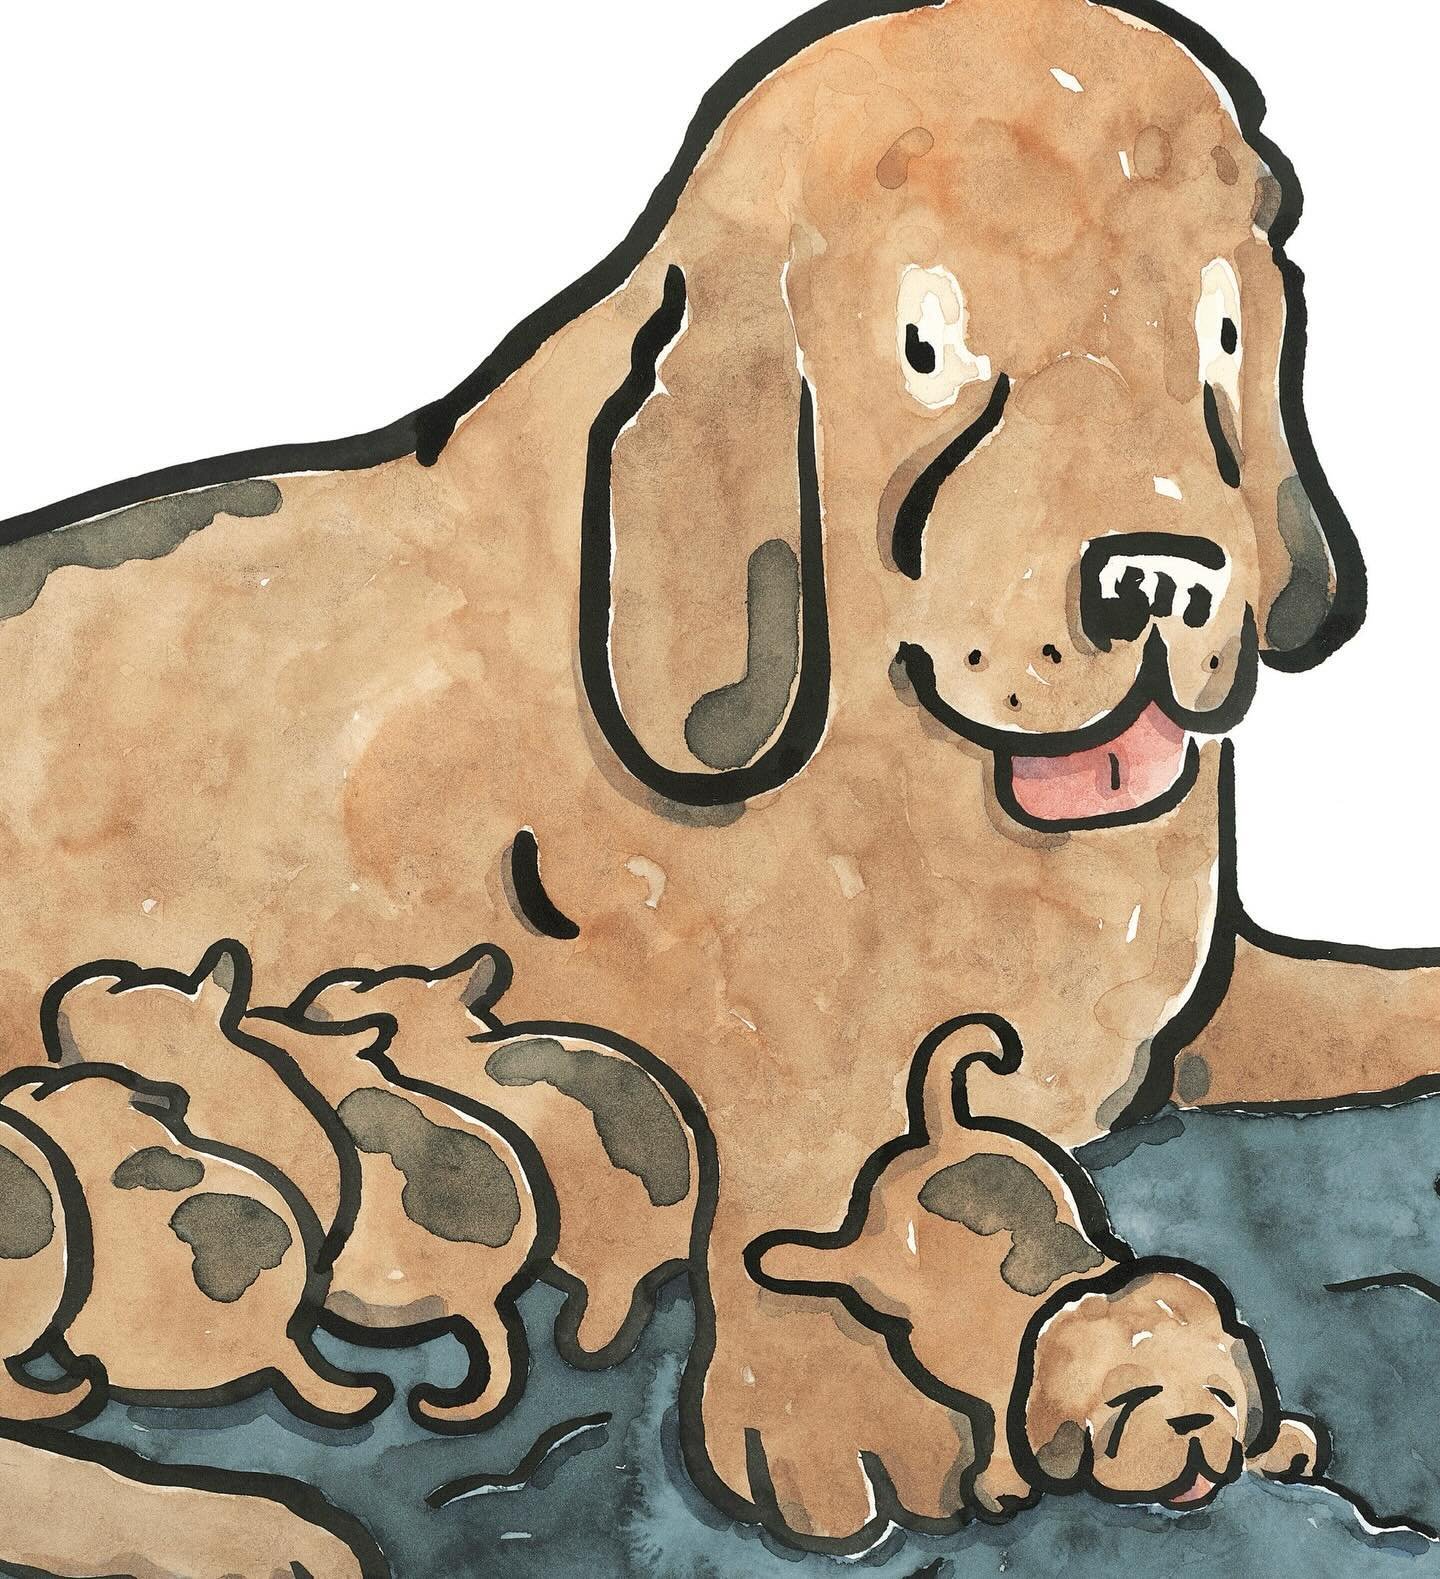 &ldquo;I have never given birth, but some of my favorite people in the world have.&rdquo;
That&rsquo;s the first sentence of my Mother&rsquo;s Day essay &mdash; about both dog mothers &amp; human mothers &mdash; in the current Nerdy Book Club (link t